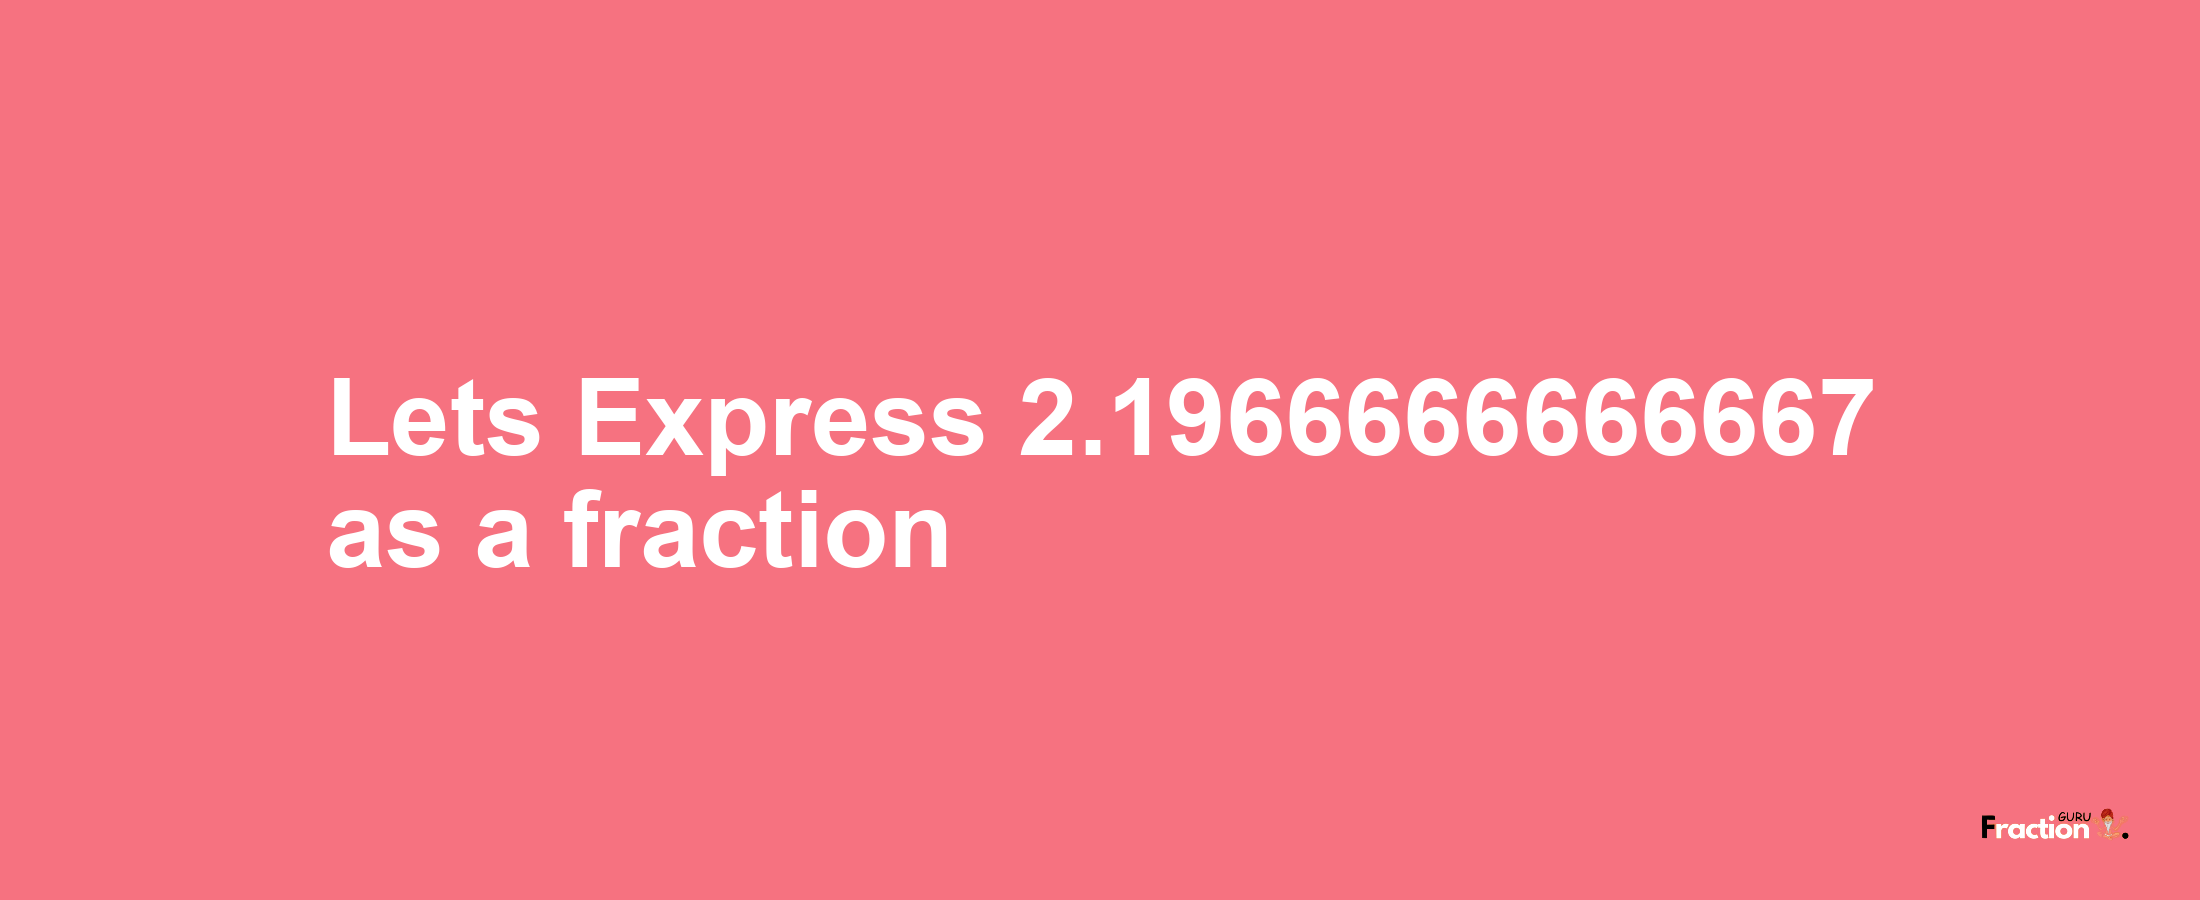 Lets Express 2.1966666666667 as afraction